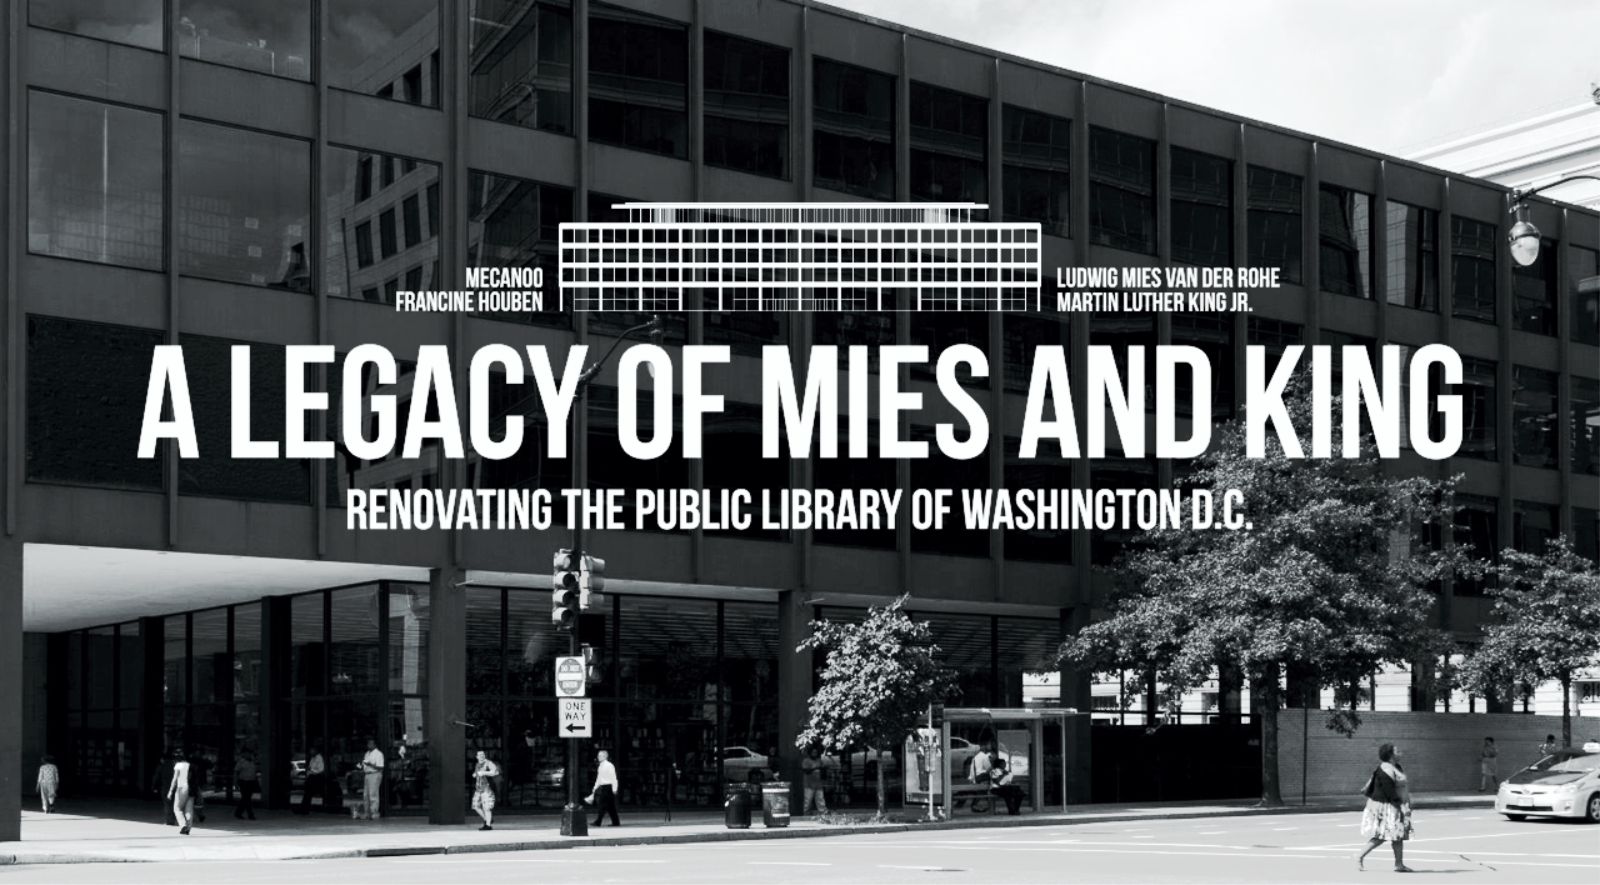 A Legacy of Mies and King